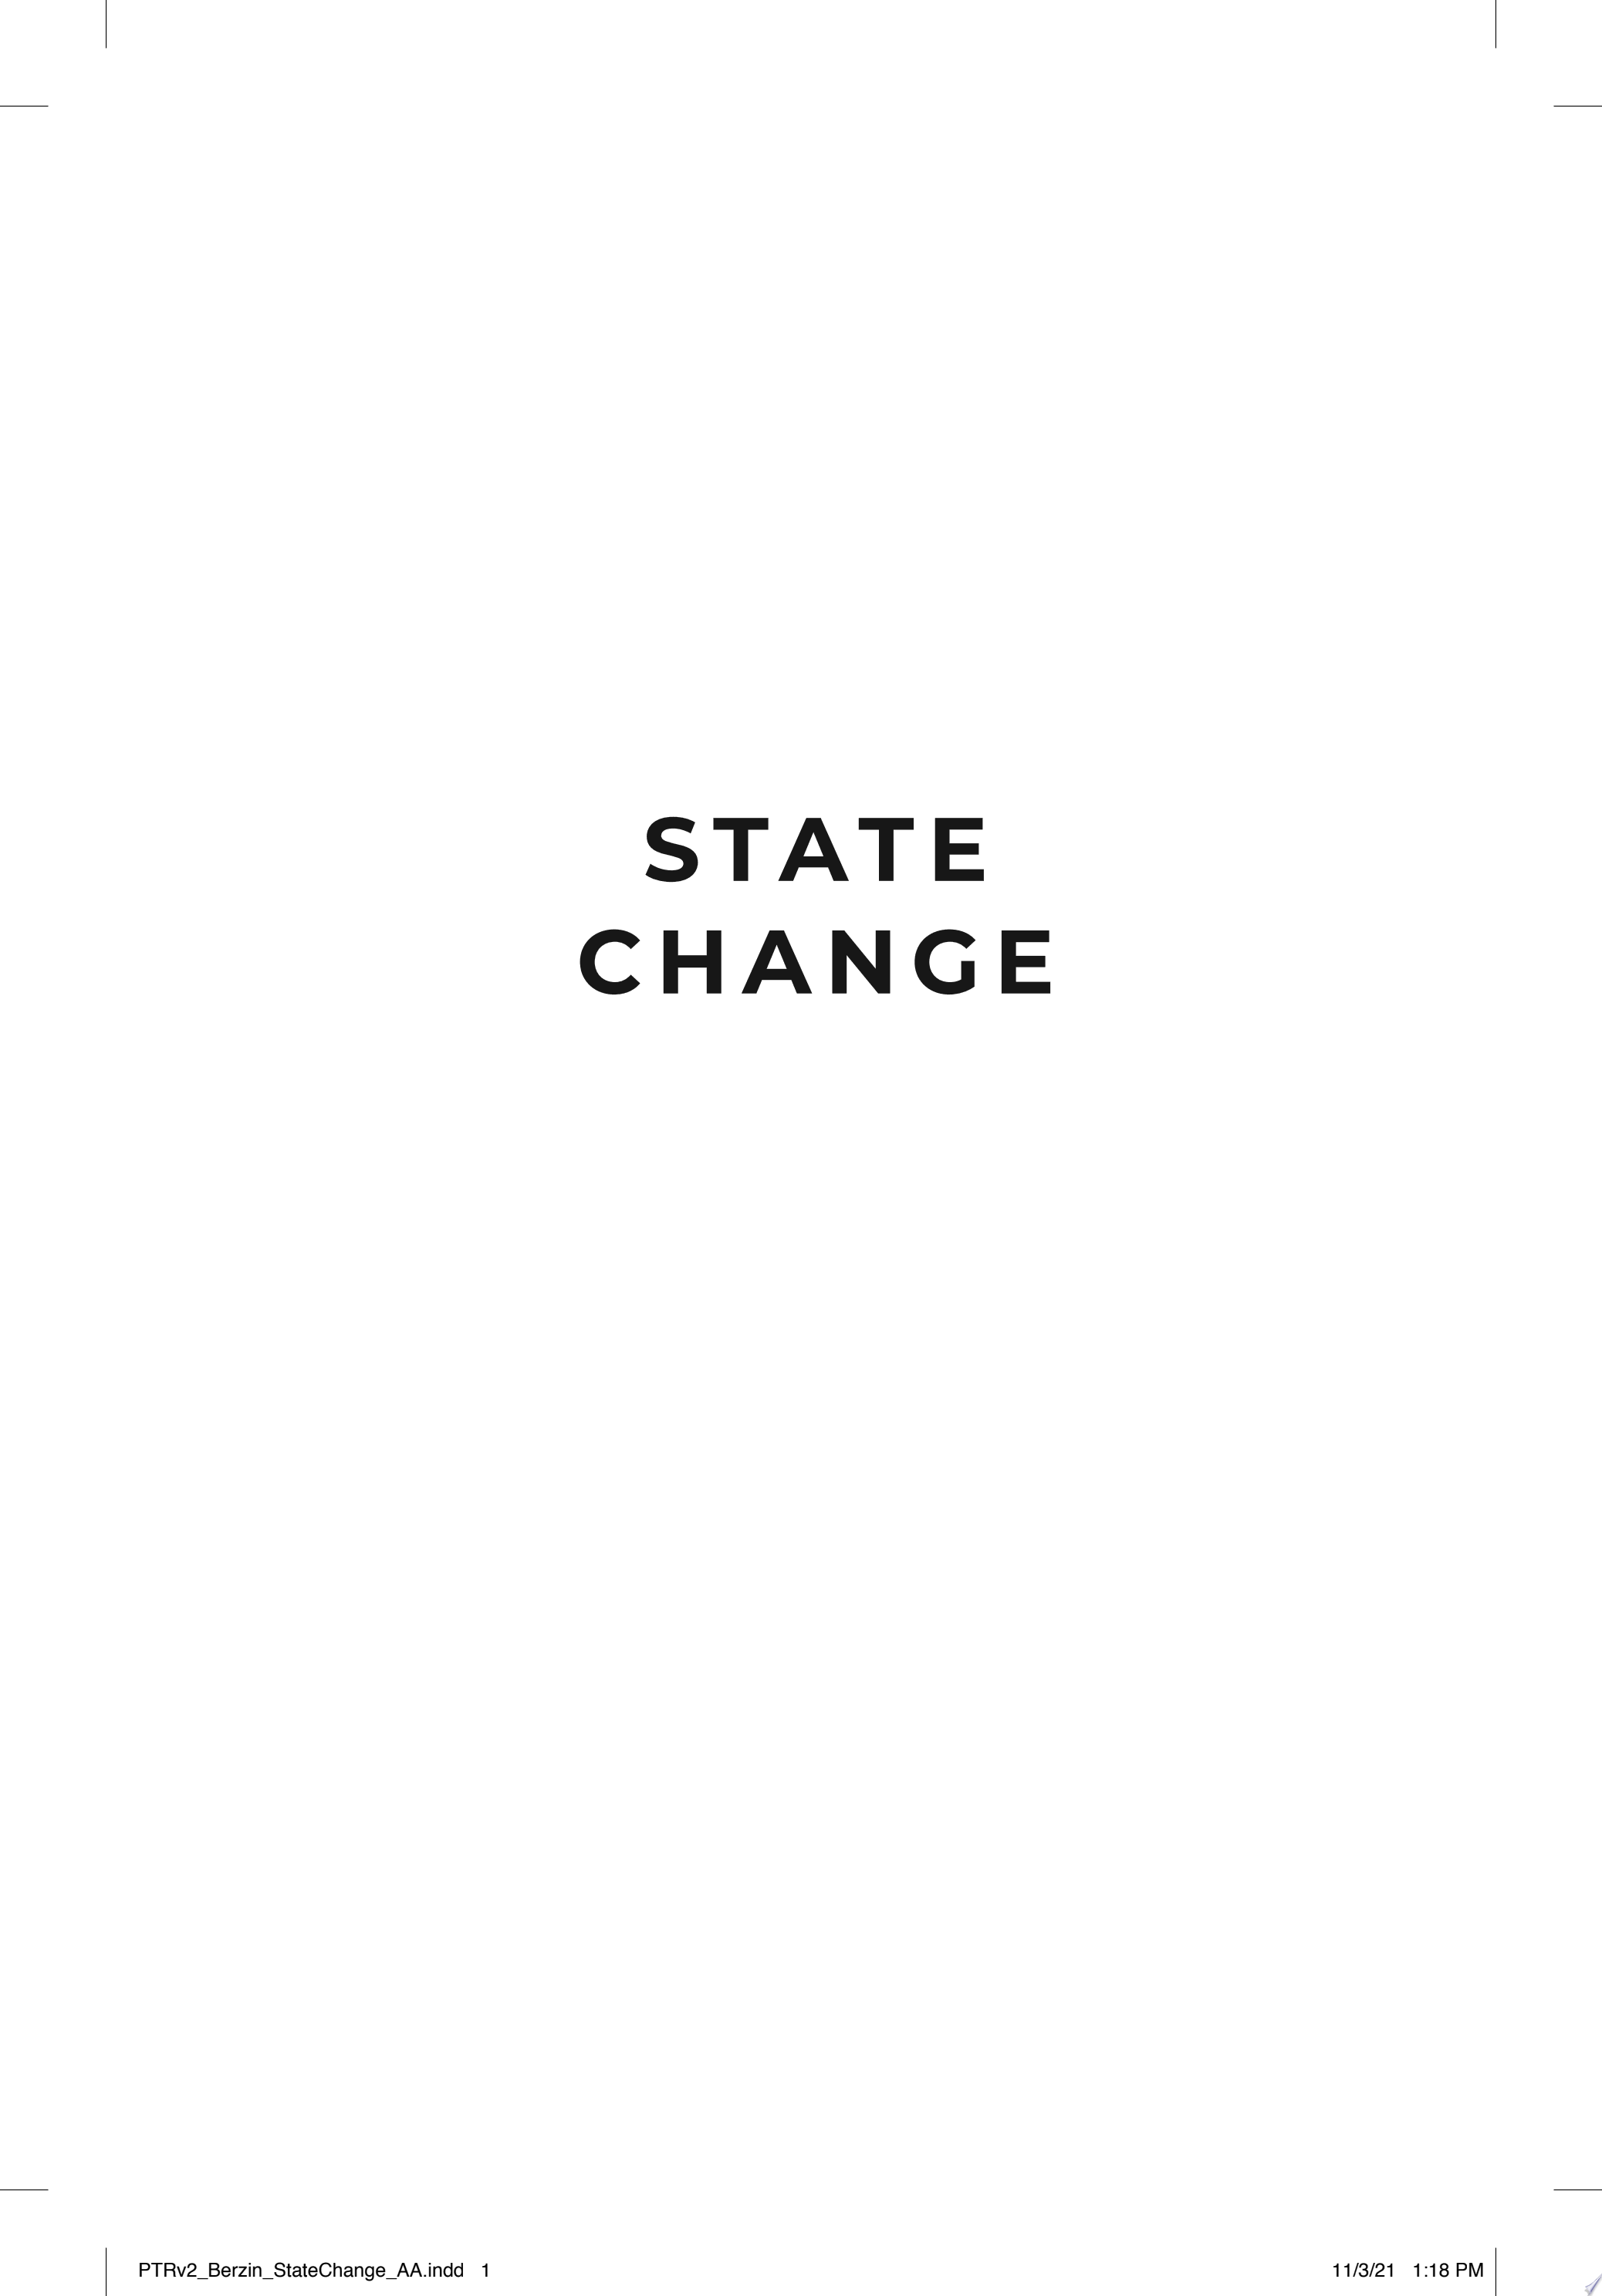 Image for "State Change"